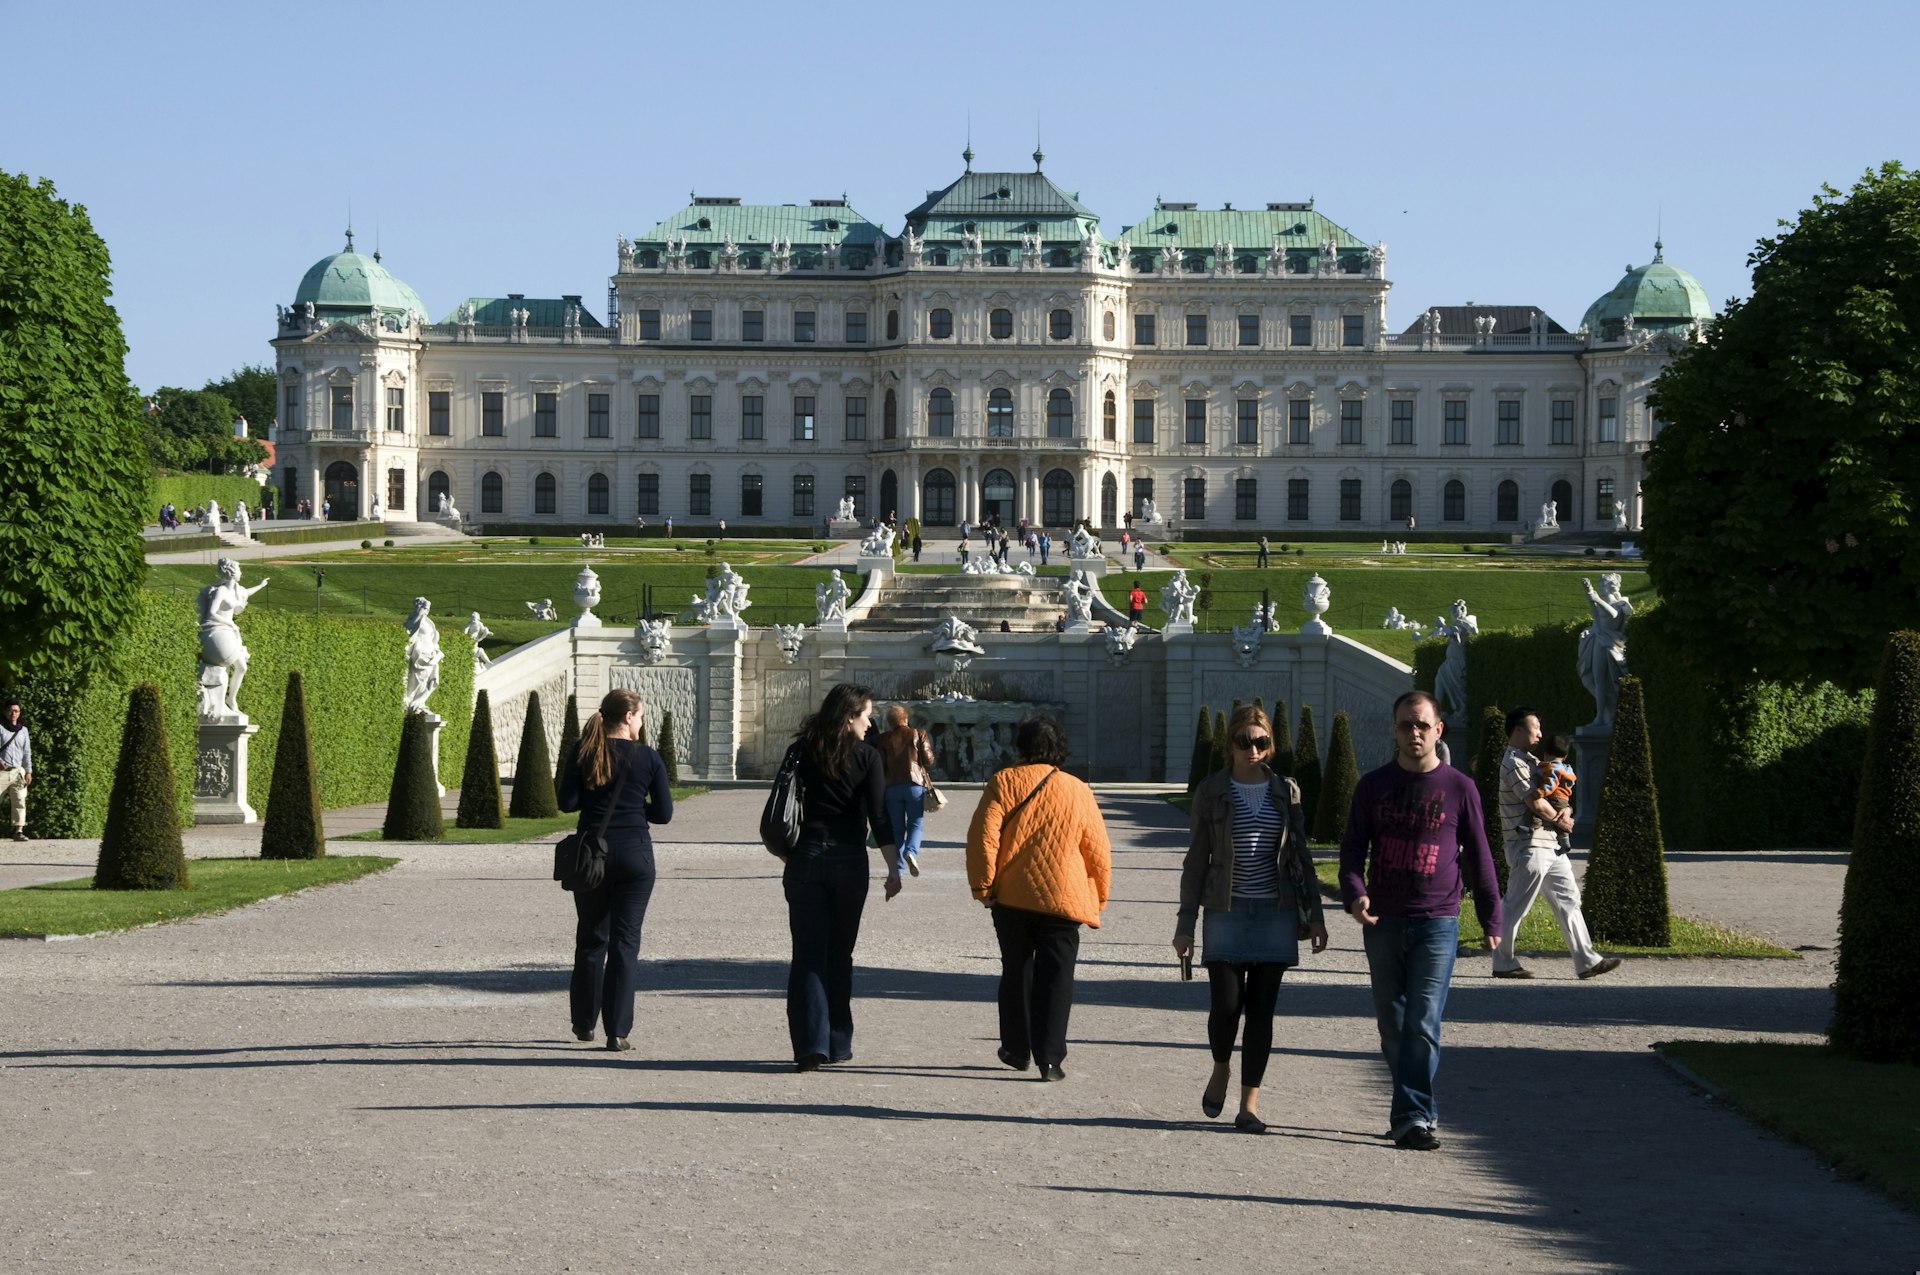 The manicured grounds and gardens of Belvedere Palace are free to visit